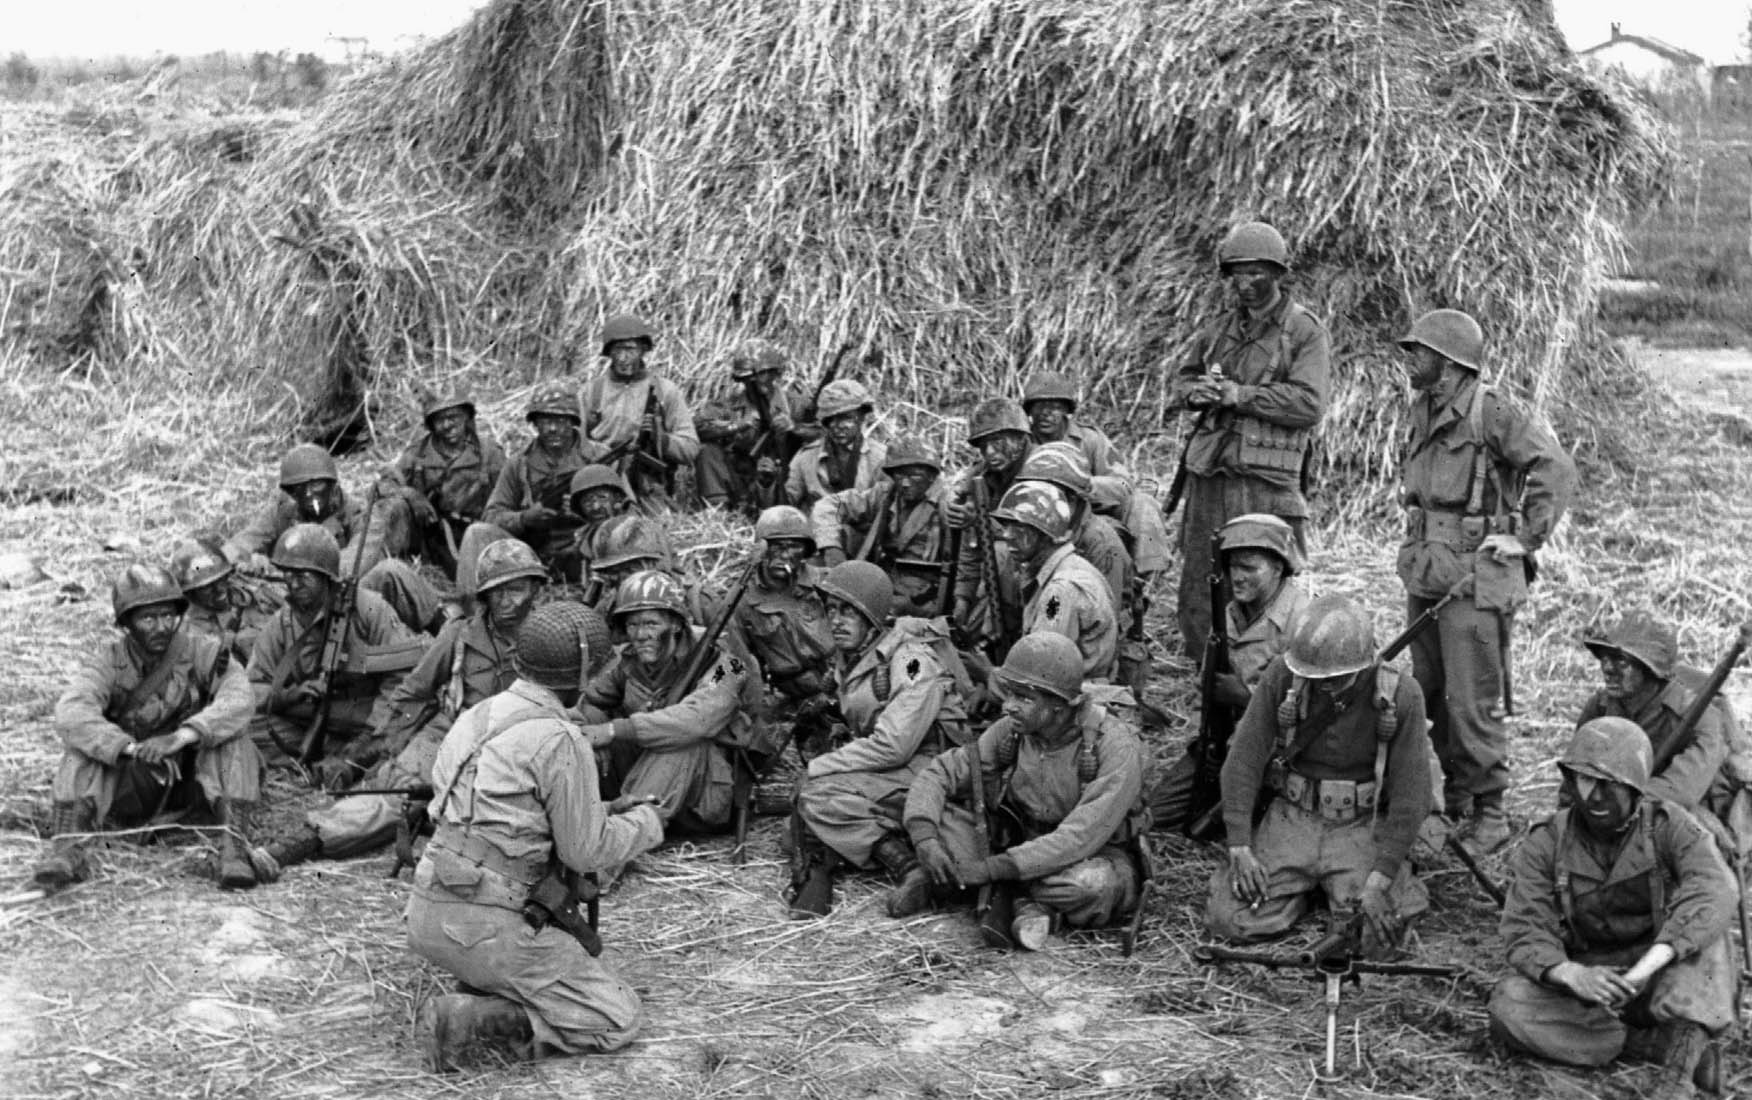 After battling for weeks on the Winter Line, the 1st SSF was moved to bolster the Anzio beachhead. A night patrol, with soldiers’ faces blackened, is being briefed behind an Italian haystack before moving out, April 20, 1944.